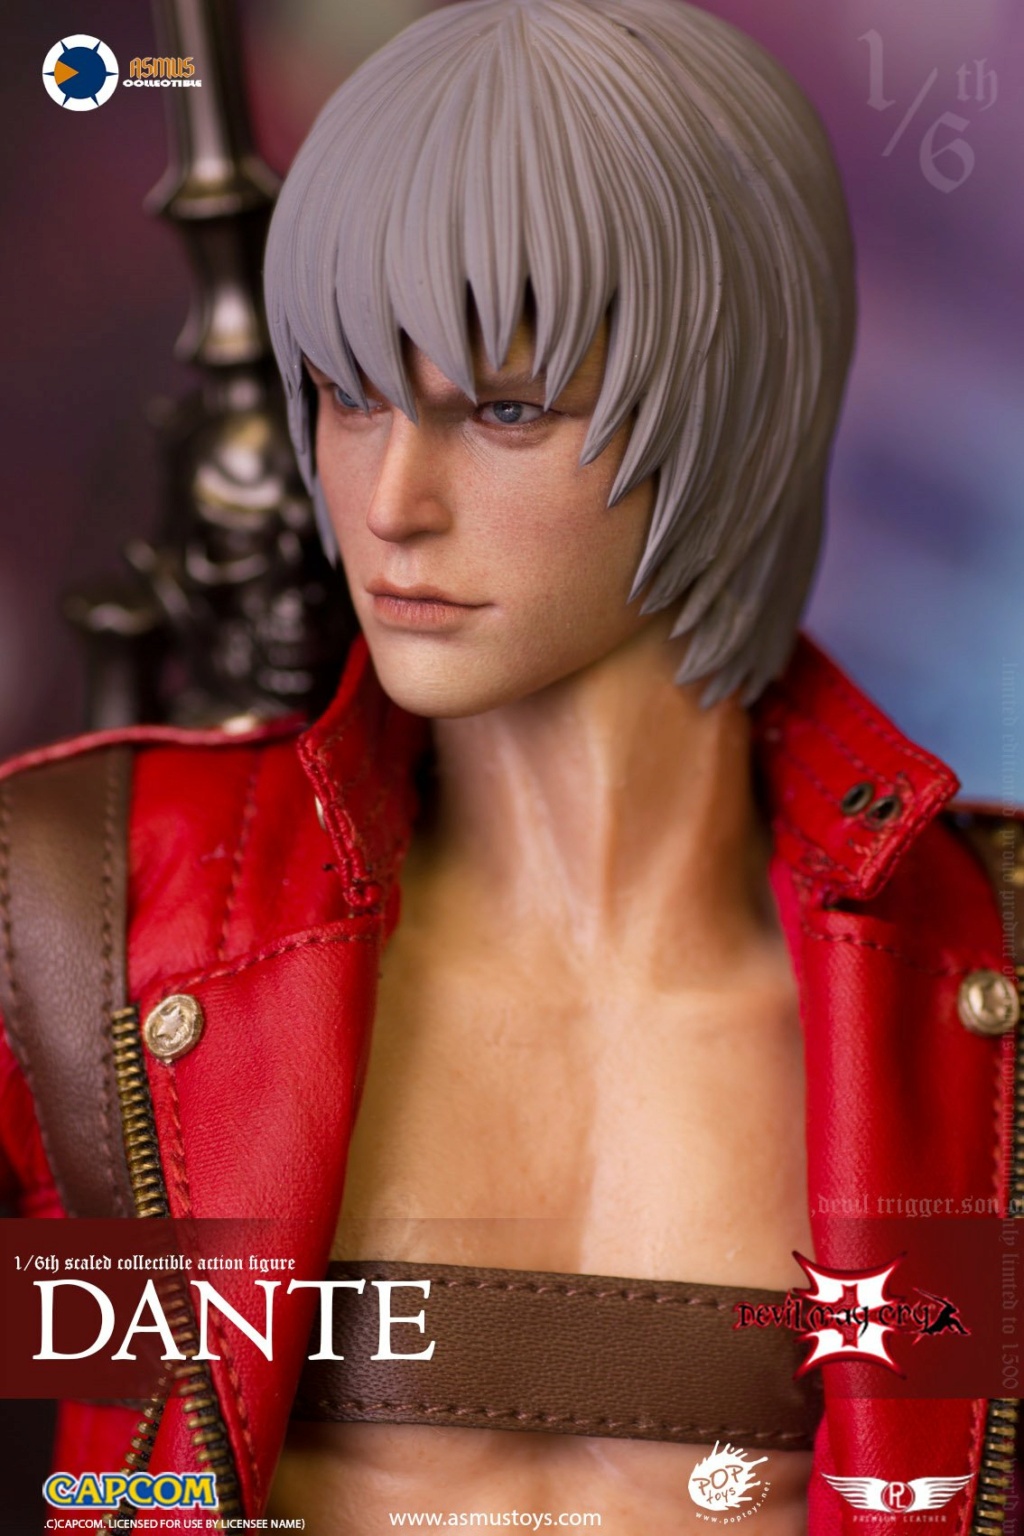 NEW PRODUCT: Asmus Toys: 1/6 Devil May Cry 3 - DANTE/Dante Standard Edition (DMC300V2) & Deluxe Edition 10462610